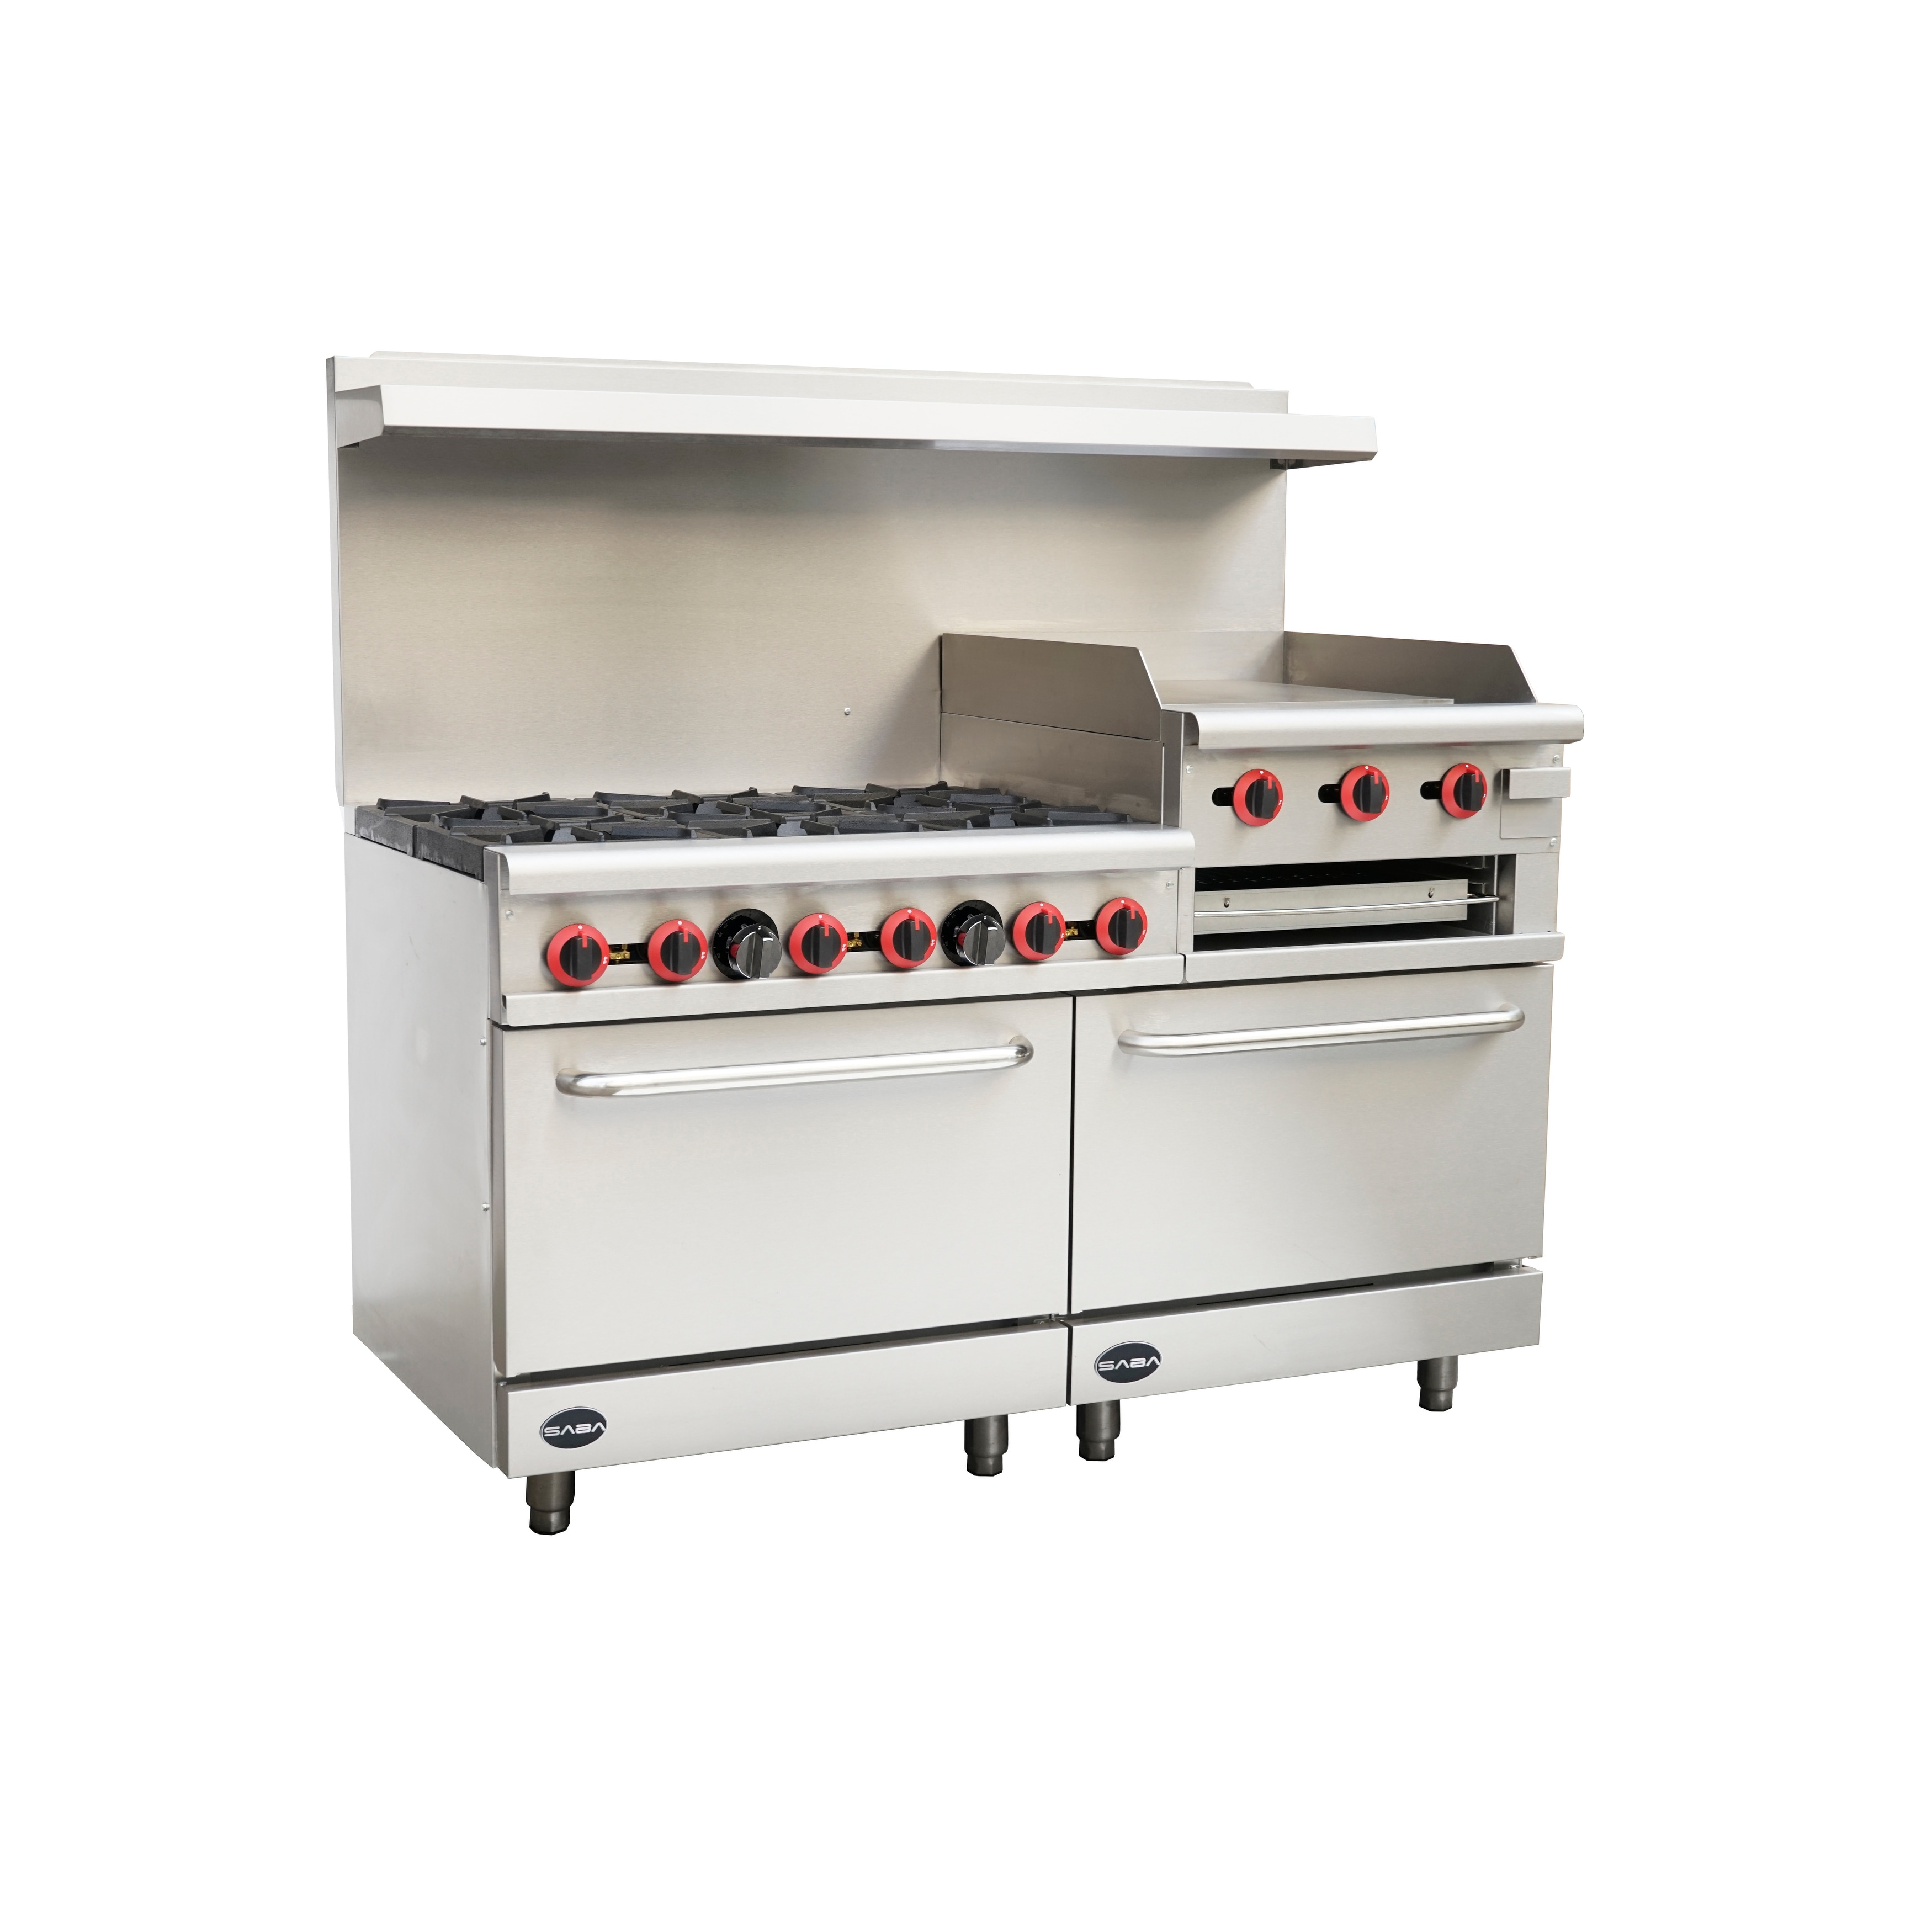 SABA GR60-GS24 Commercial 6 Burner Double Oven Gas Range and Griddle and Broiler